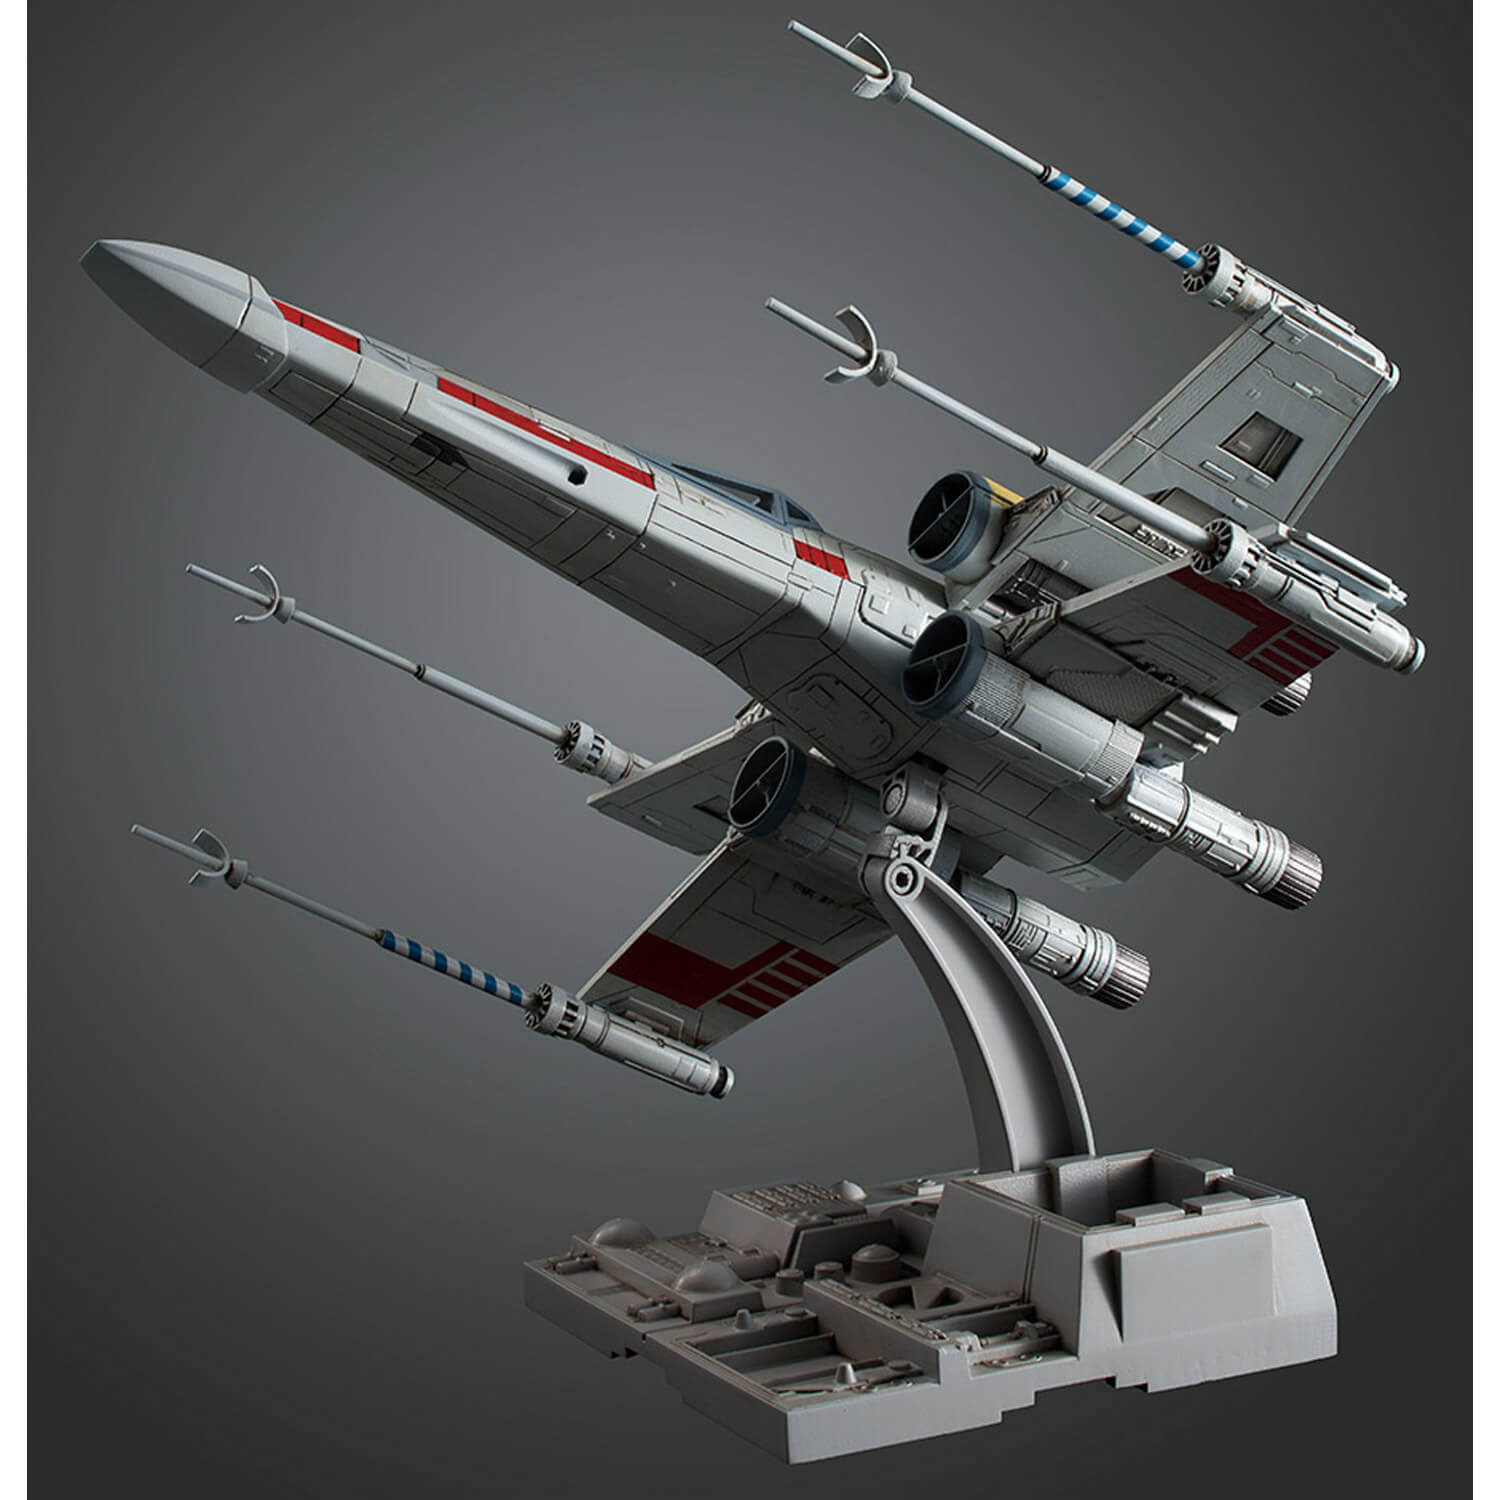 X-Wing Starfighter 1:72 Scale Kit